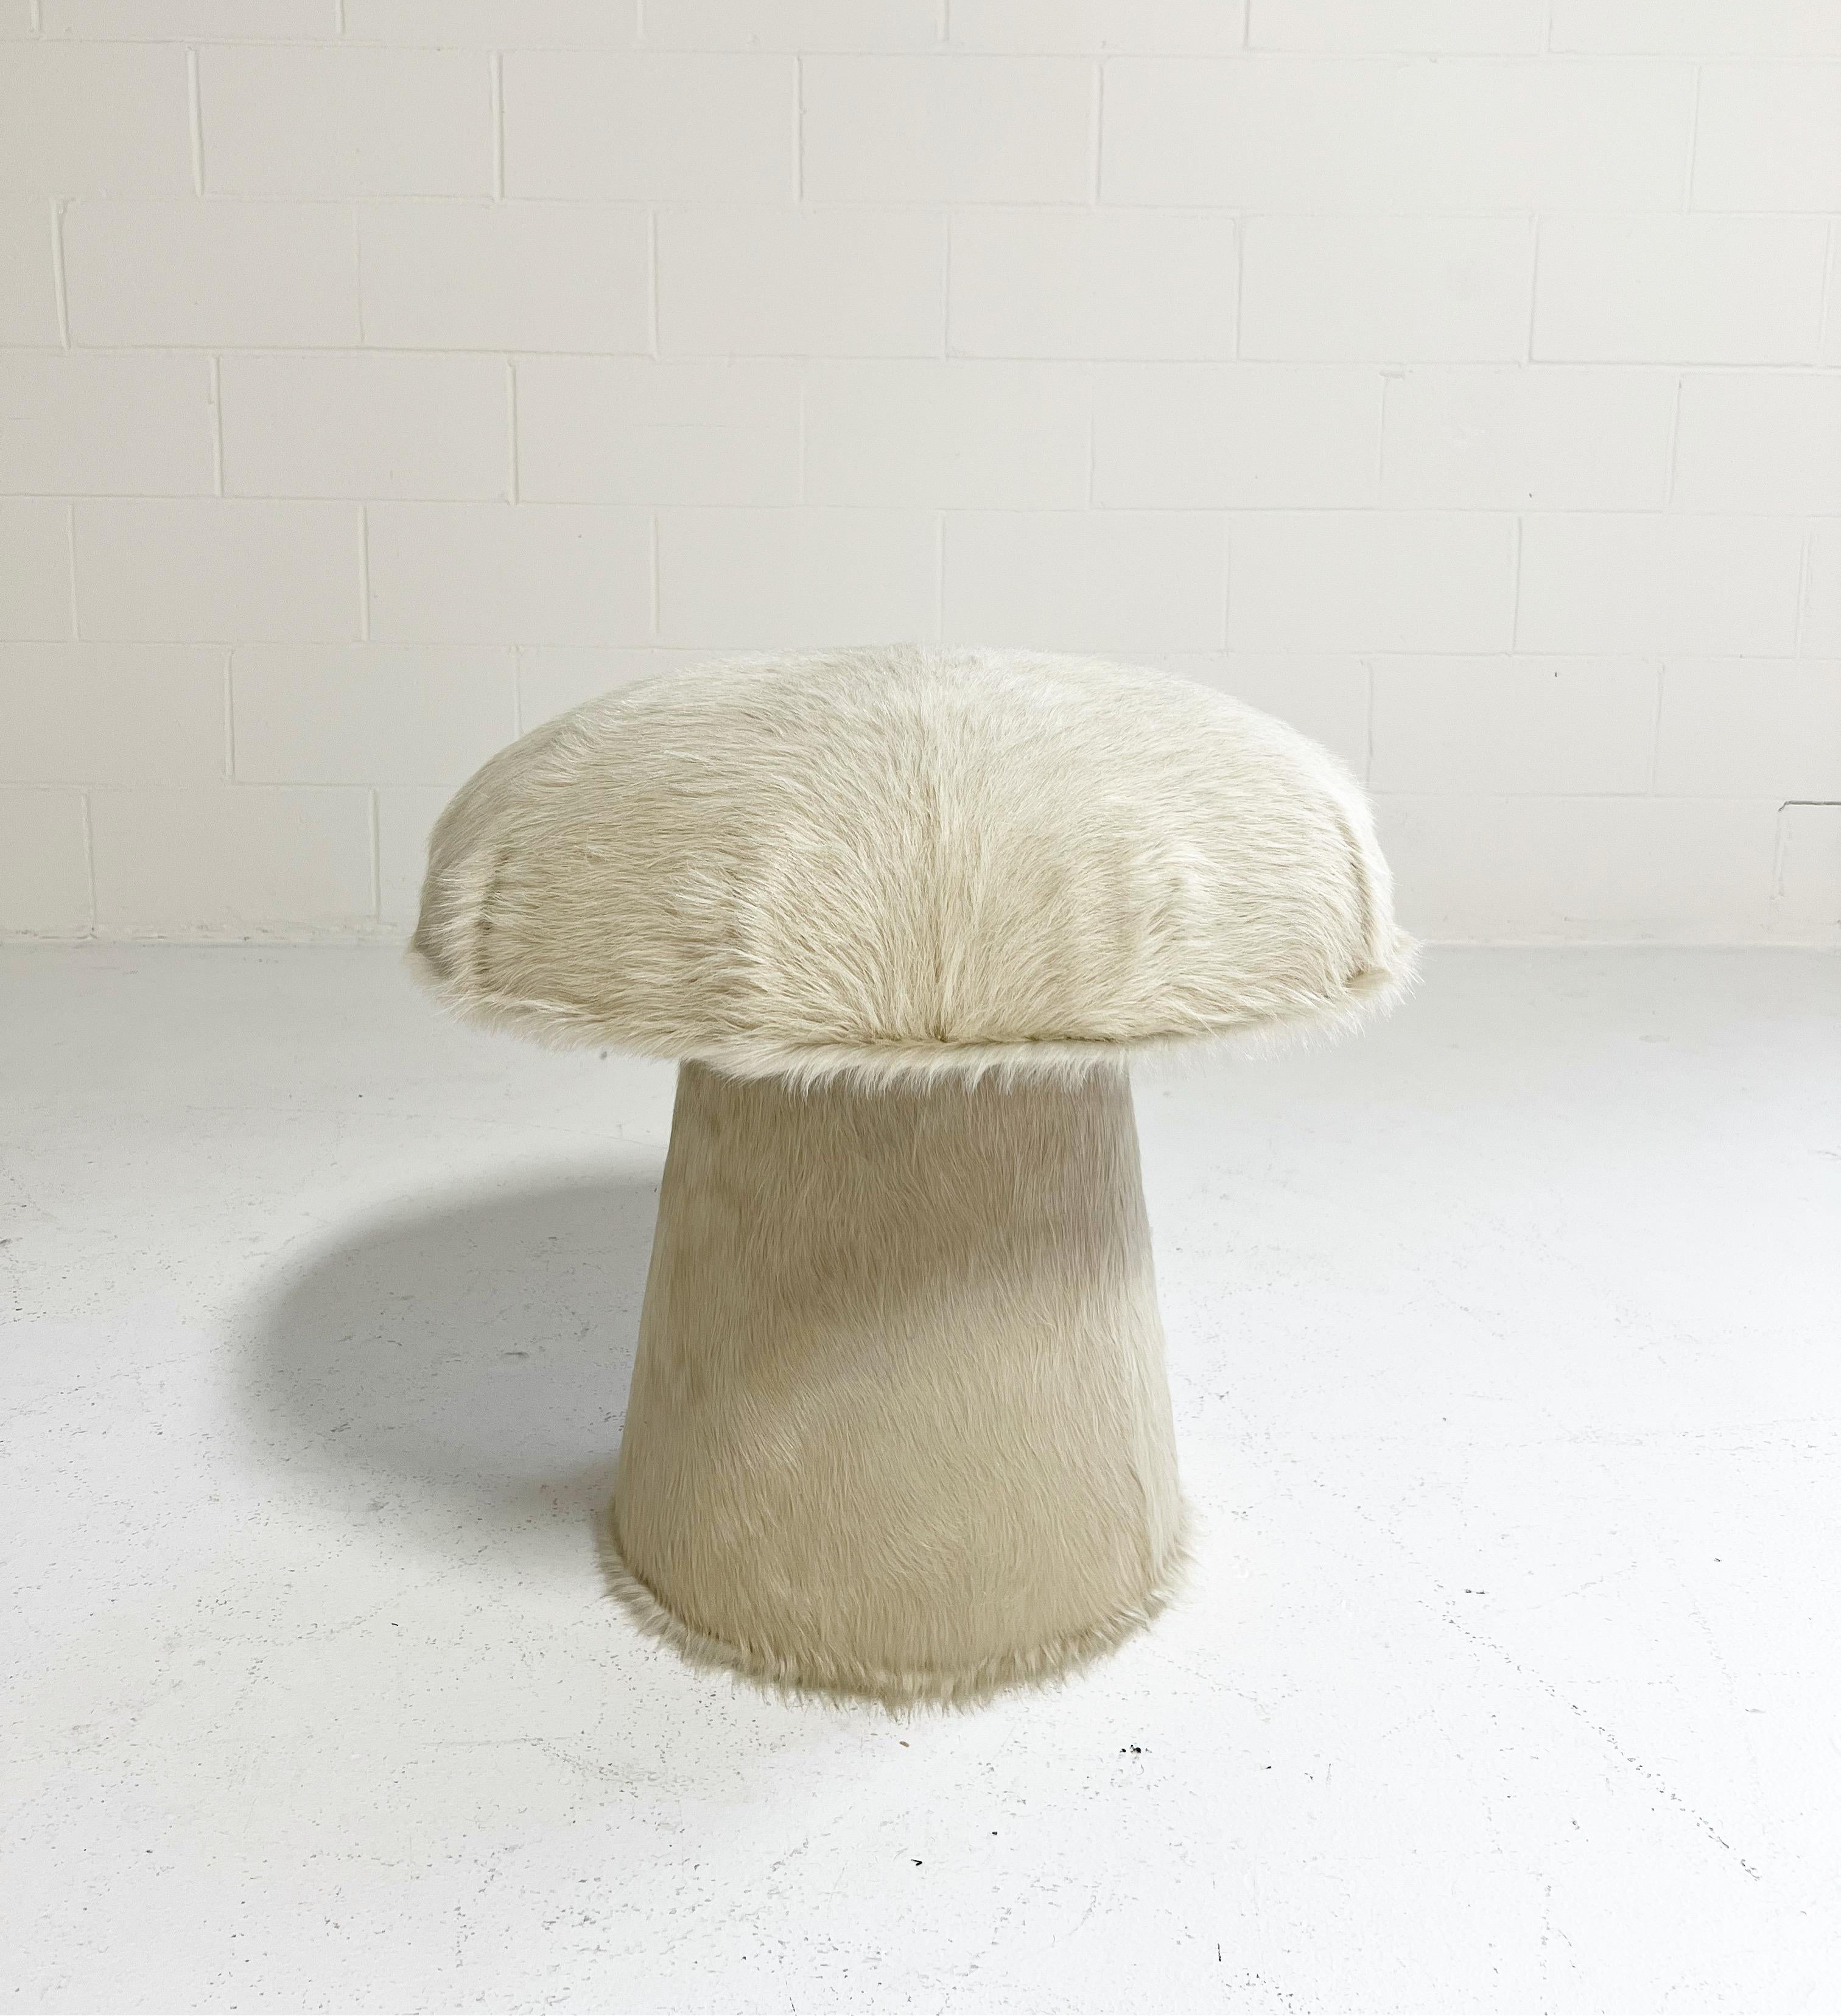 This Forsyth mushroom pouf ottoman was created and designed by the Forsyth design team. Each ottoman is handcrafted in Saint Louis. A cute decorative piece for any room adding texture, color, and a bit of whimsy. The perfect ottoman or extra seat.